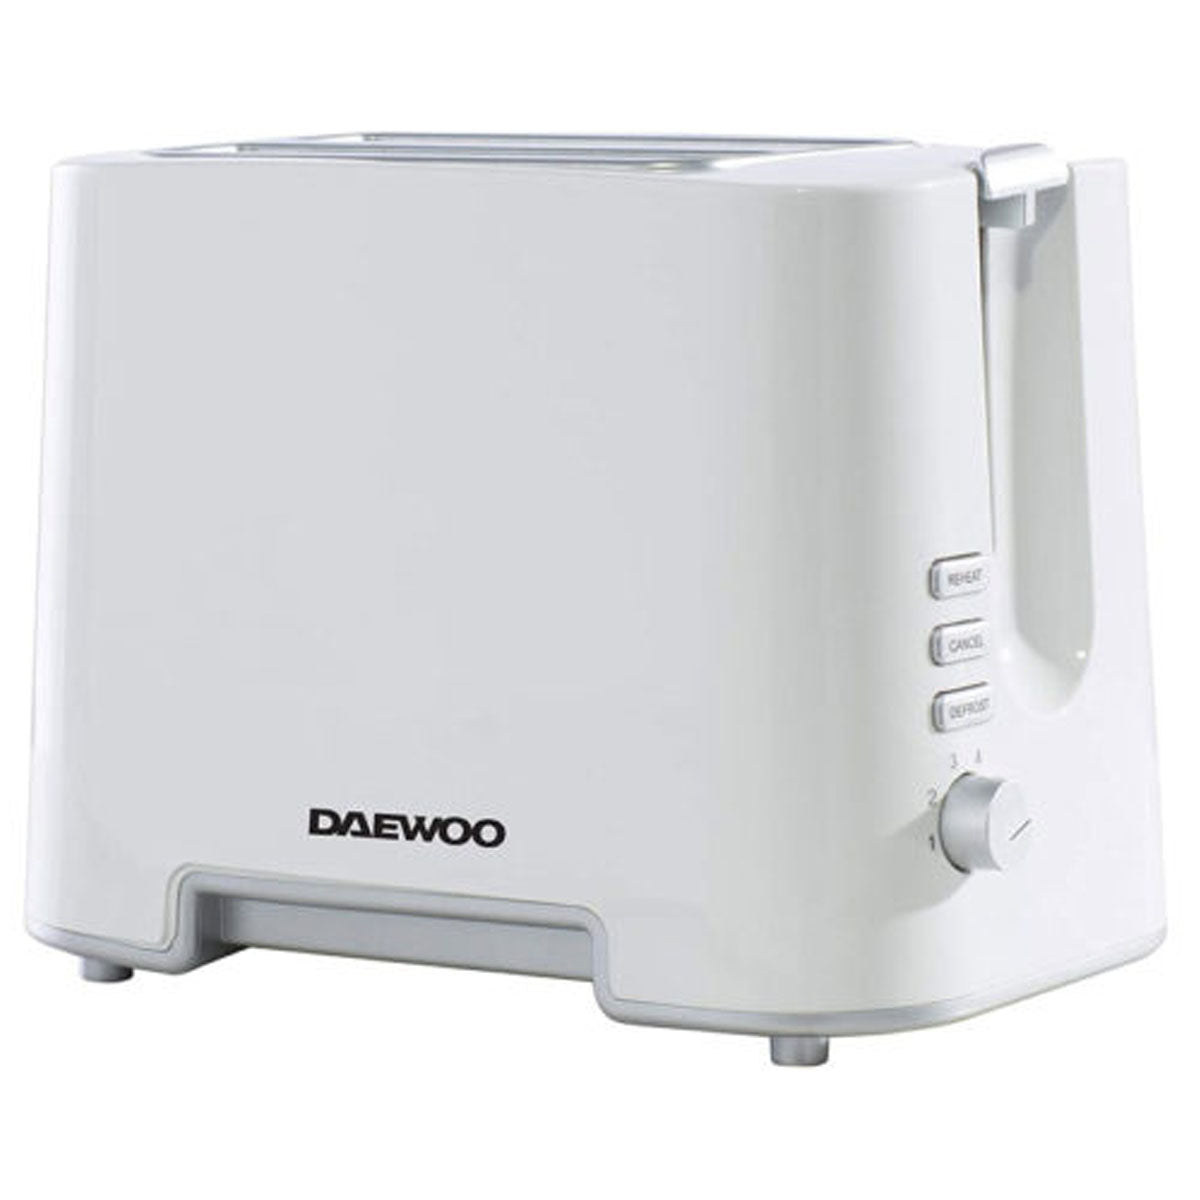 Daewoo - 2 Slice Toaster Defrost Reheat Function Easy Clean - 870W - Continental Food Store